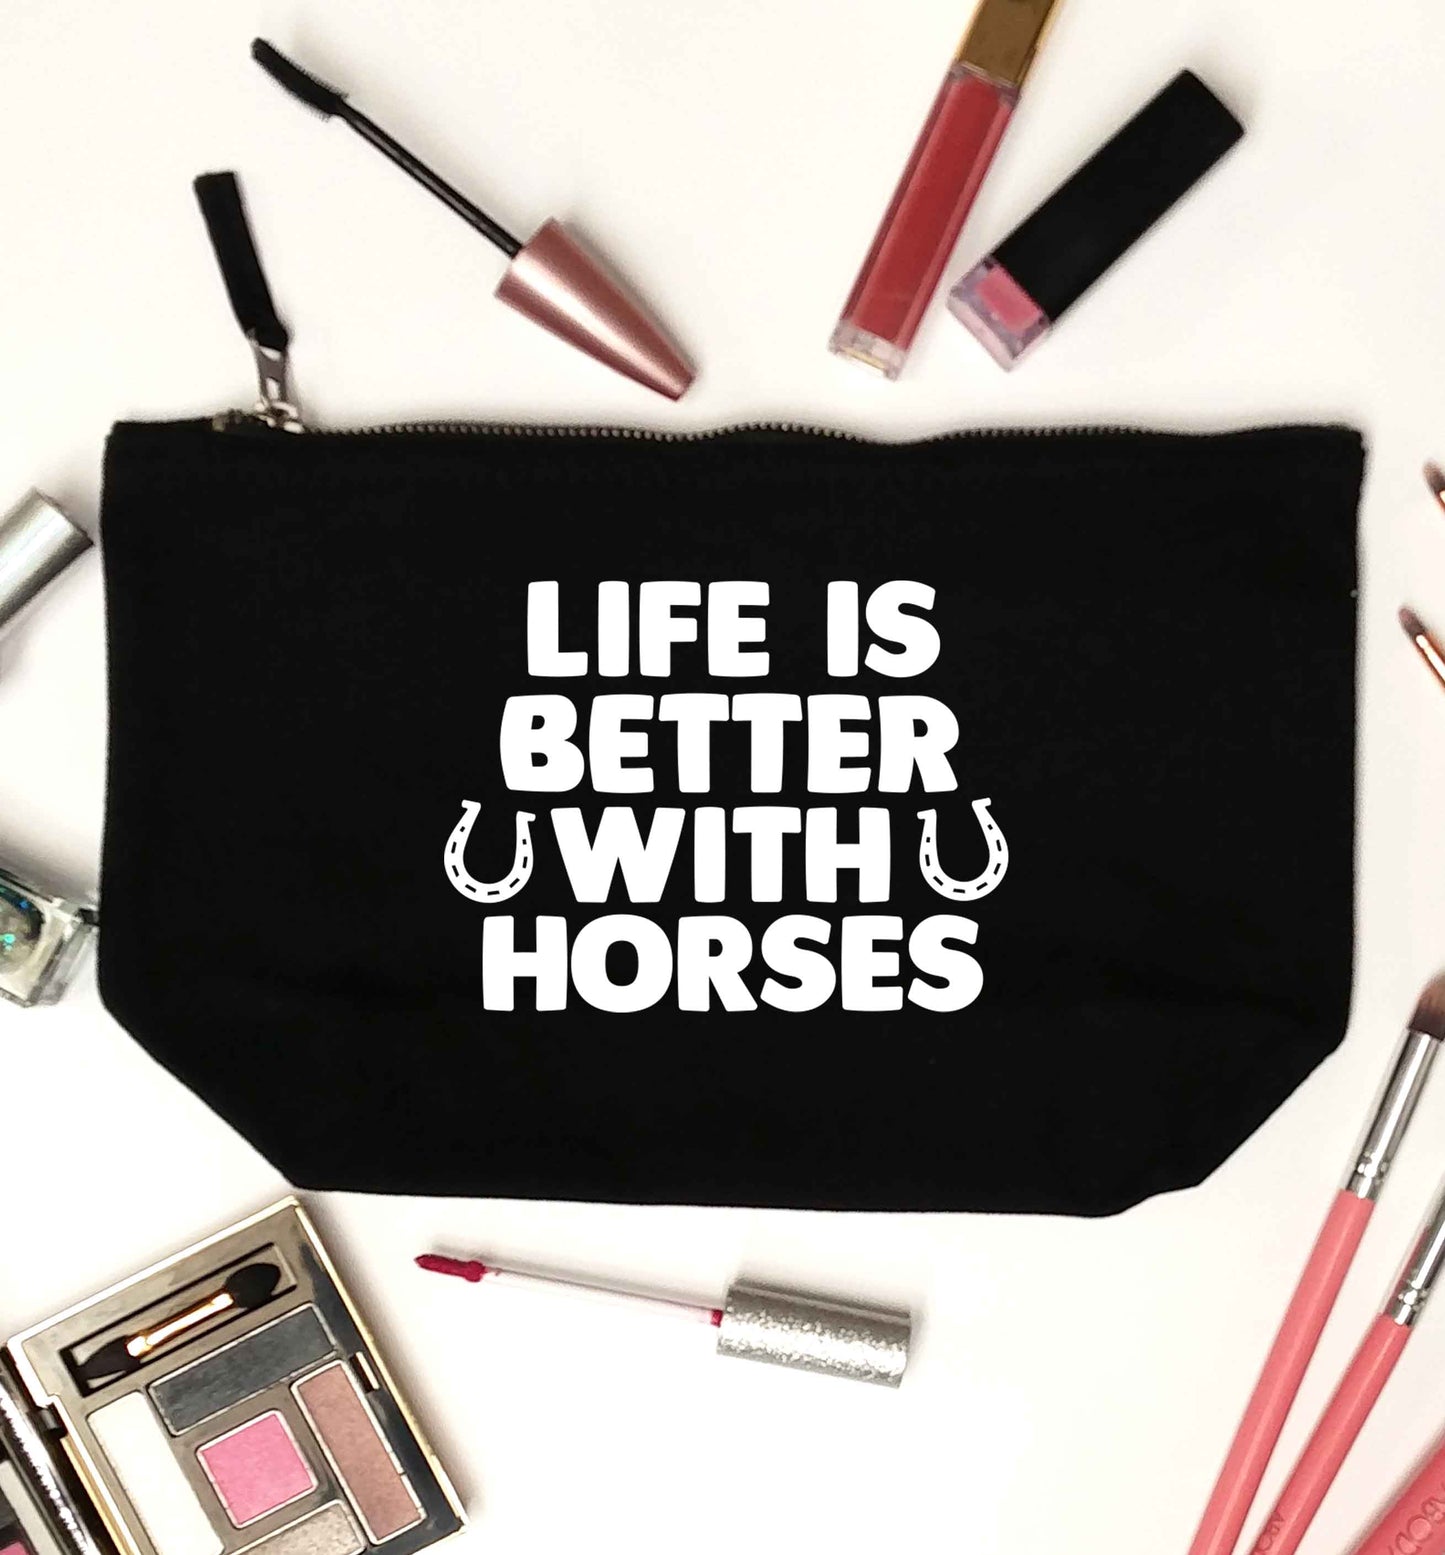 Life is better with horses black makeup bag